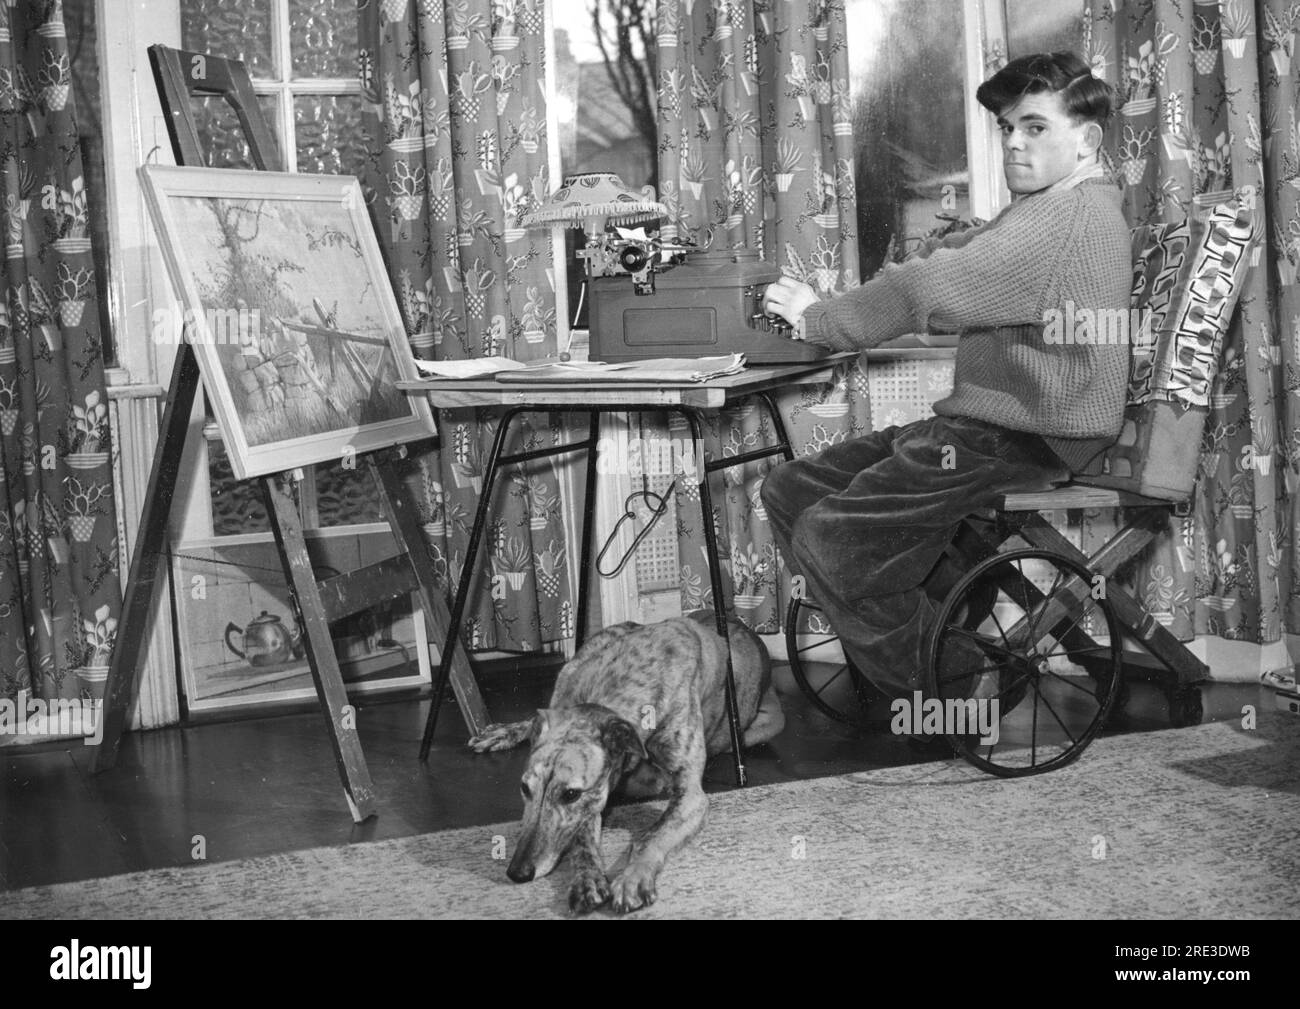 Whiteside, Michael, British radio drama author and painter, at work, 22.2.1958, ADDITIONAL-RIGHTS-CLEARANCE-INFO-NOT-AVAILABLE Stock Photo